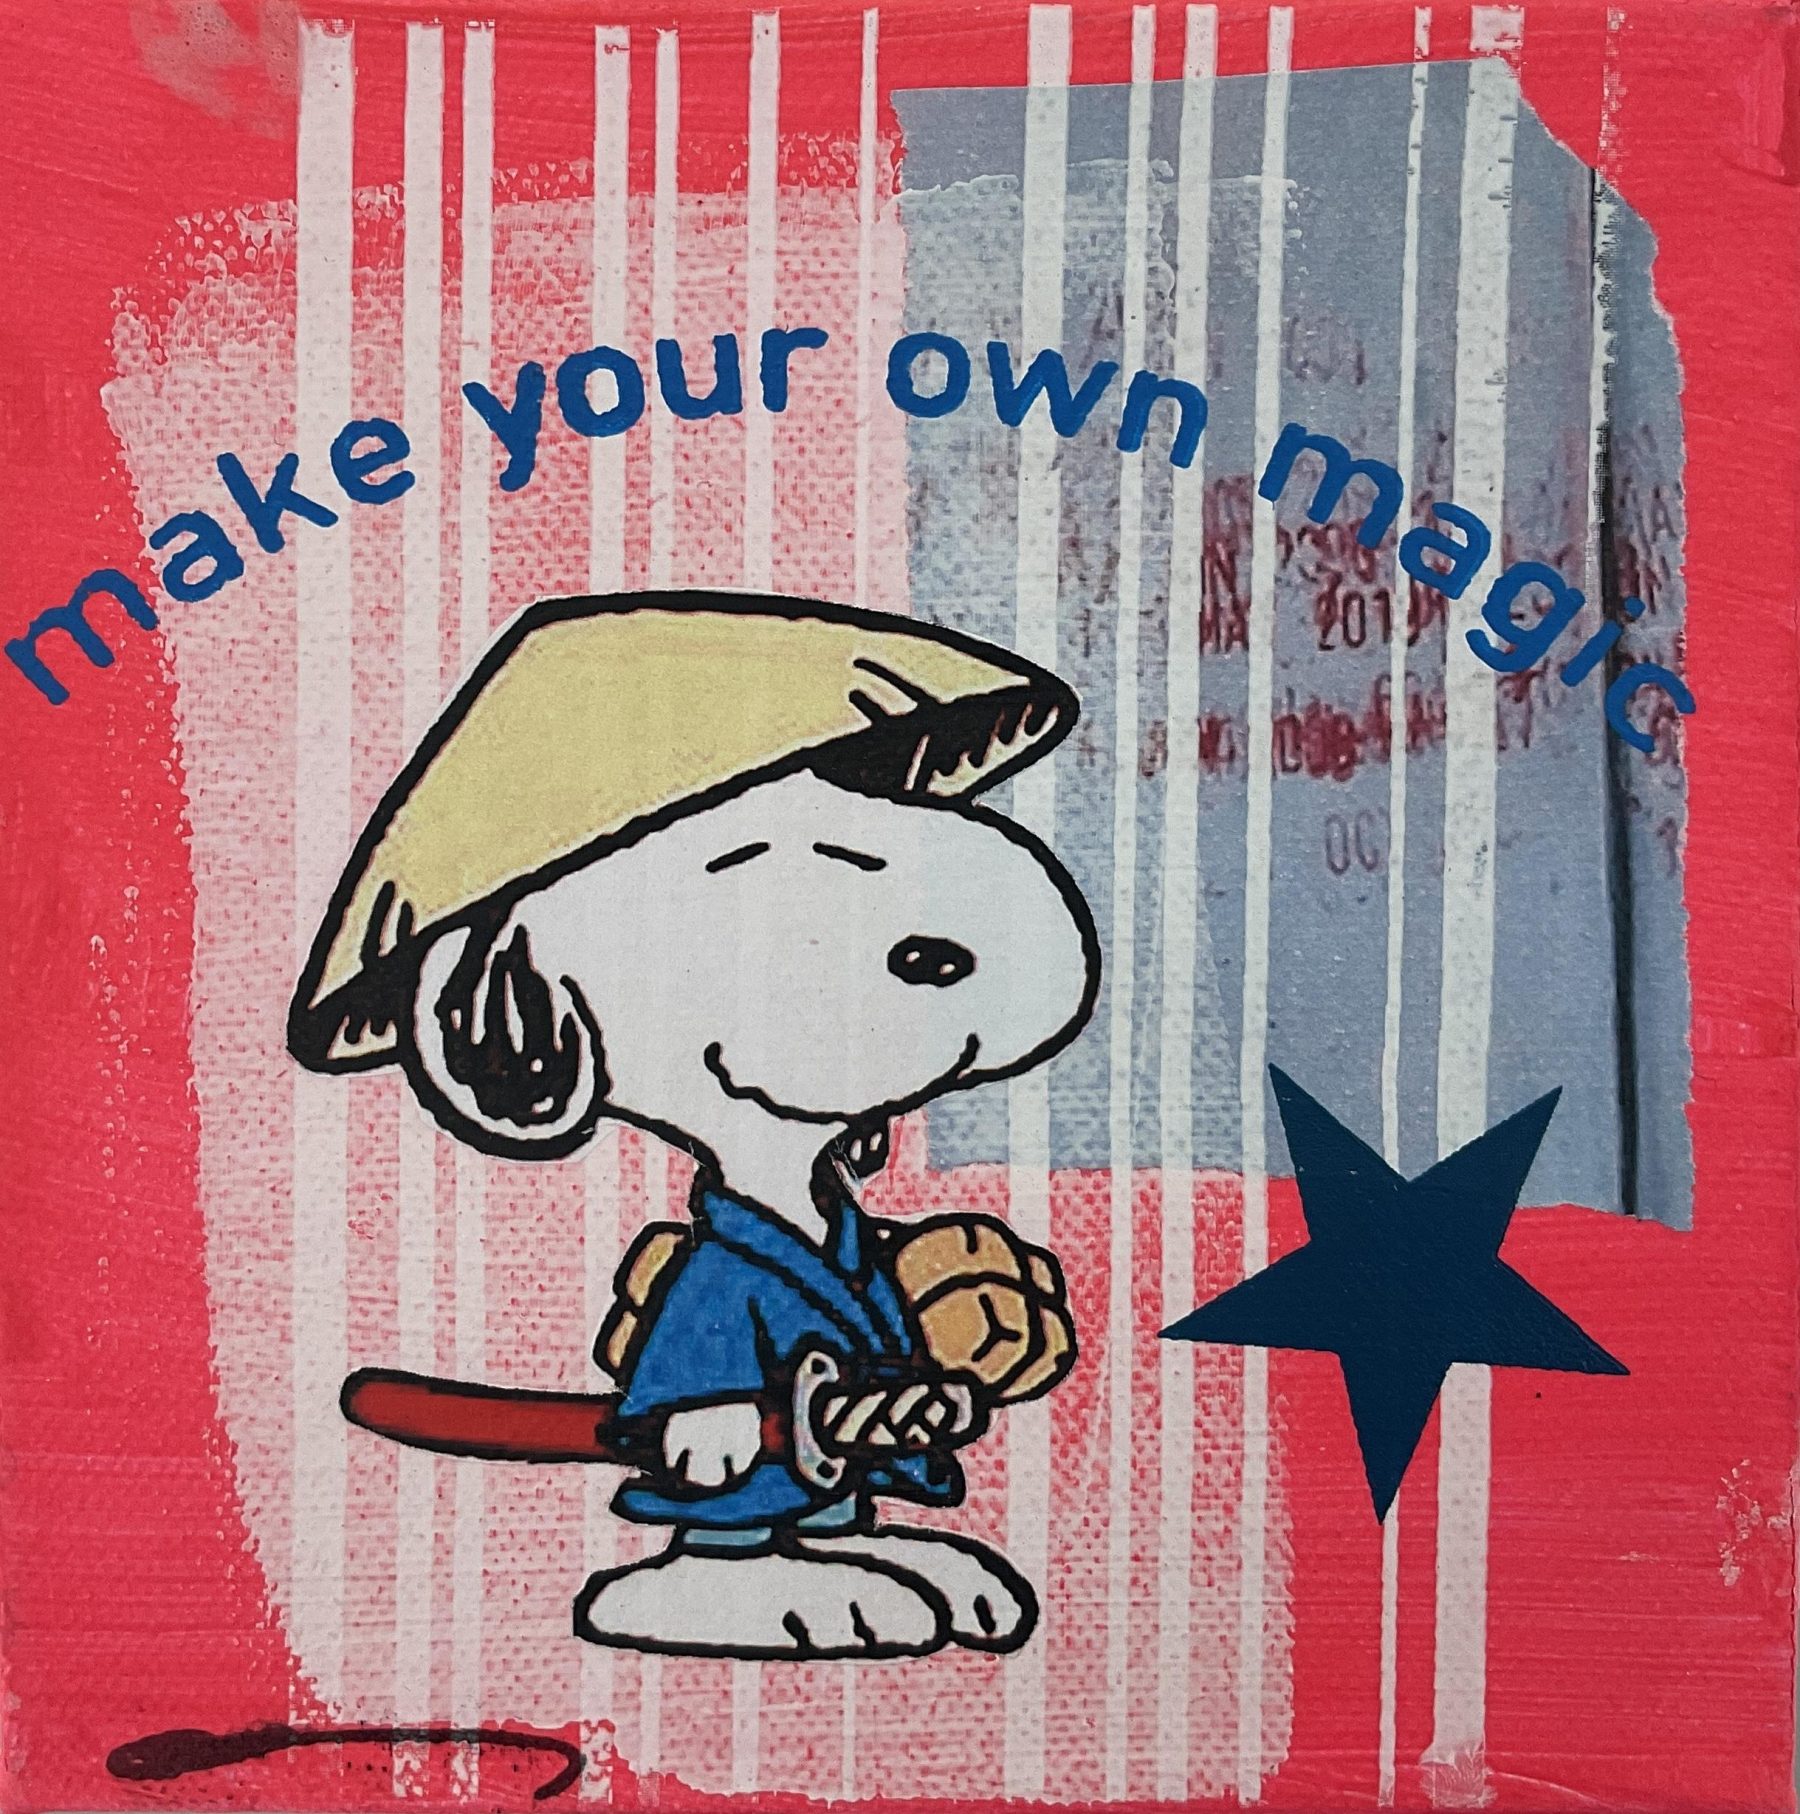 Snoopy "Make your own Magic" - Flores, Anna - k-2309AF8